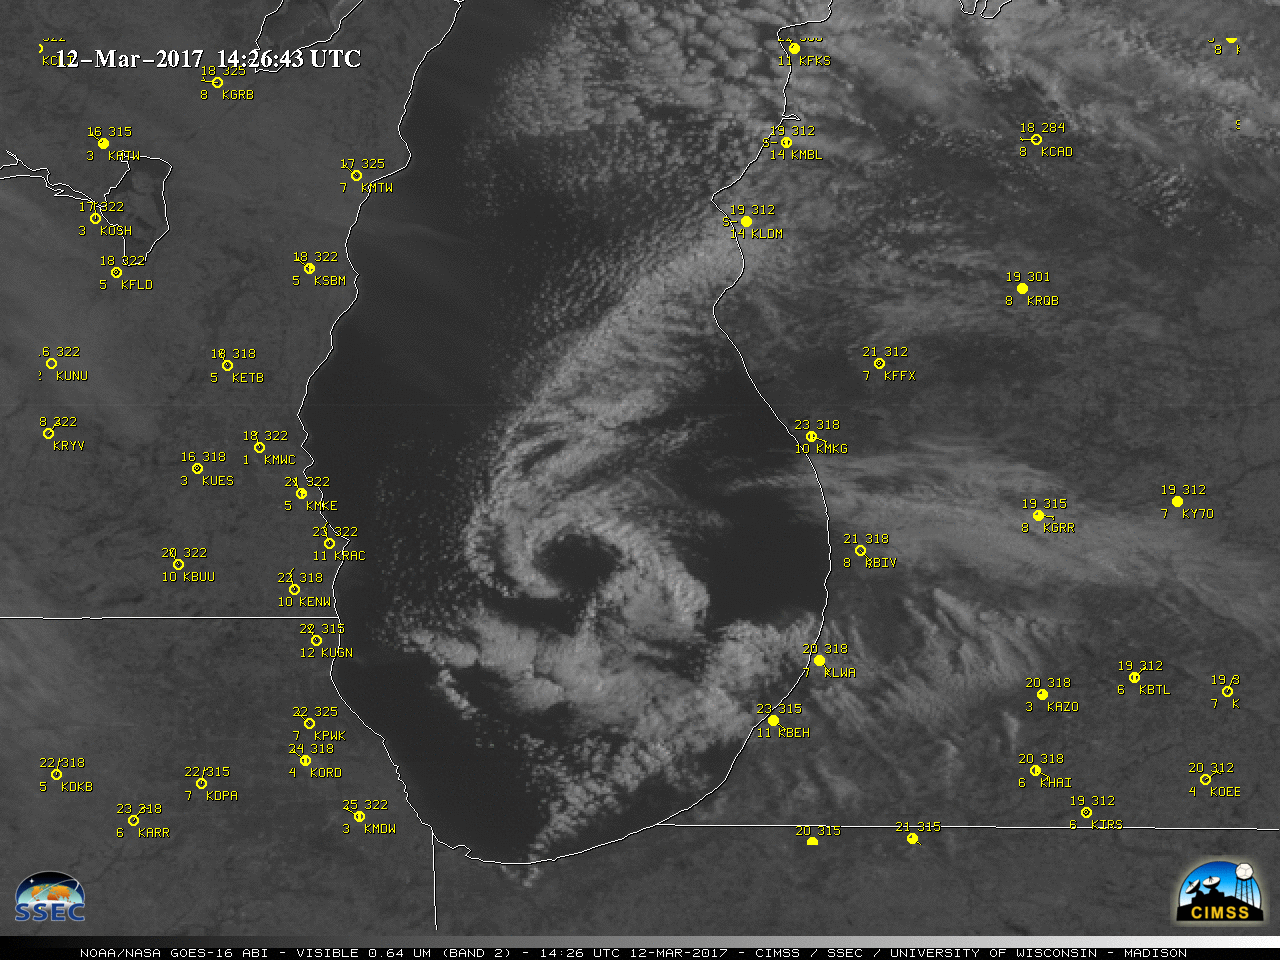 GOES-16 Visible (0.64 µm) images, with hourly surface reports [click to play animation]